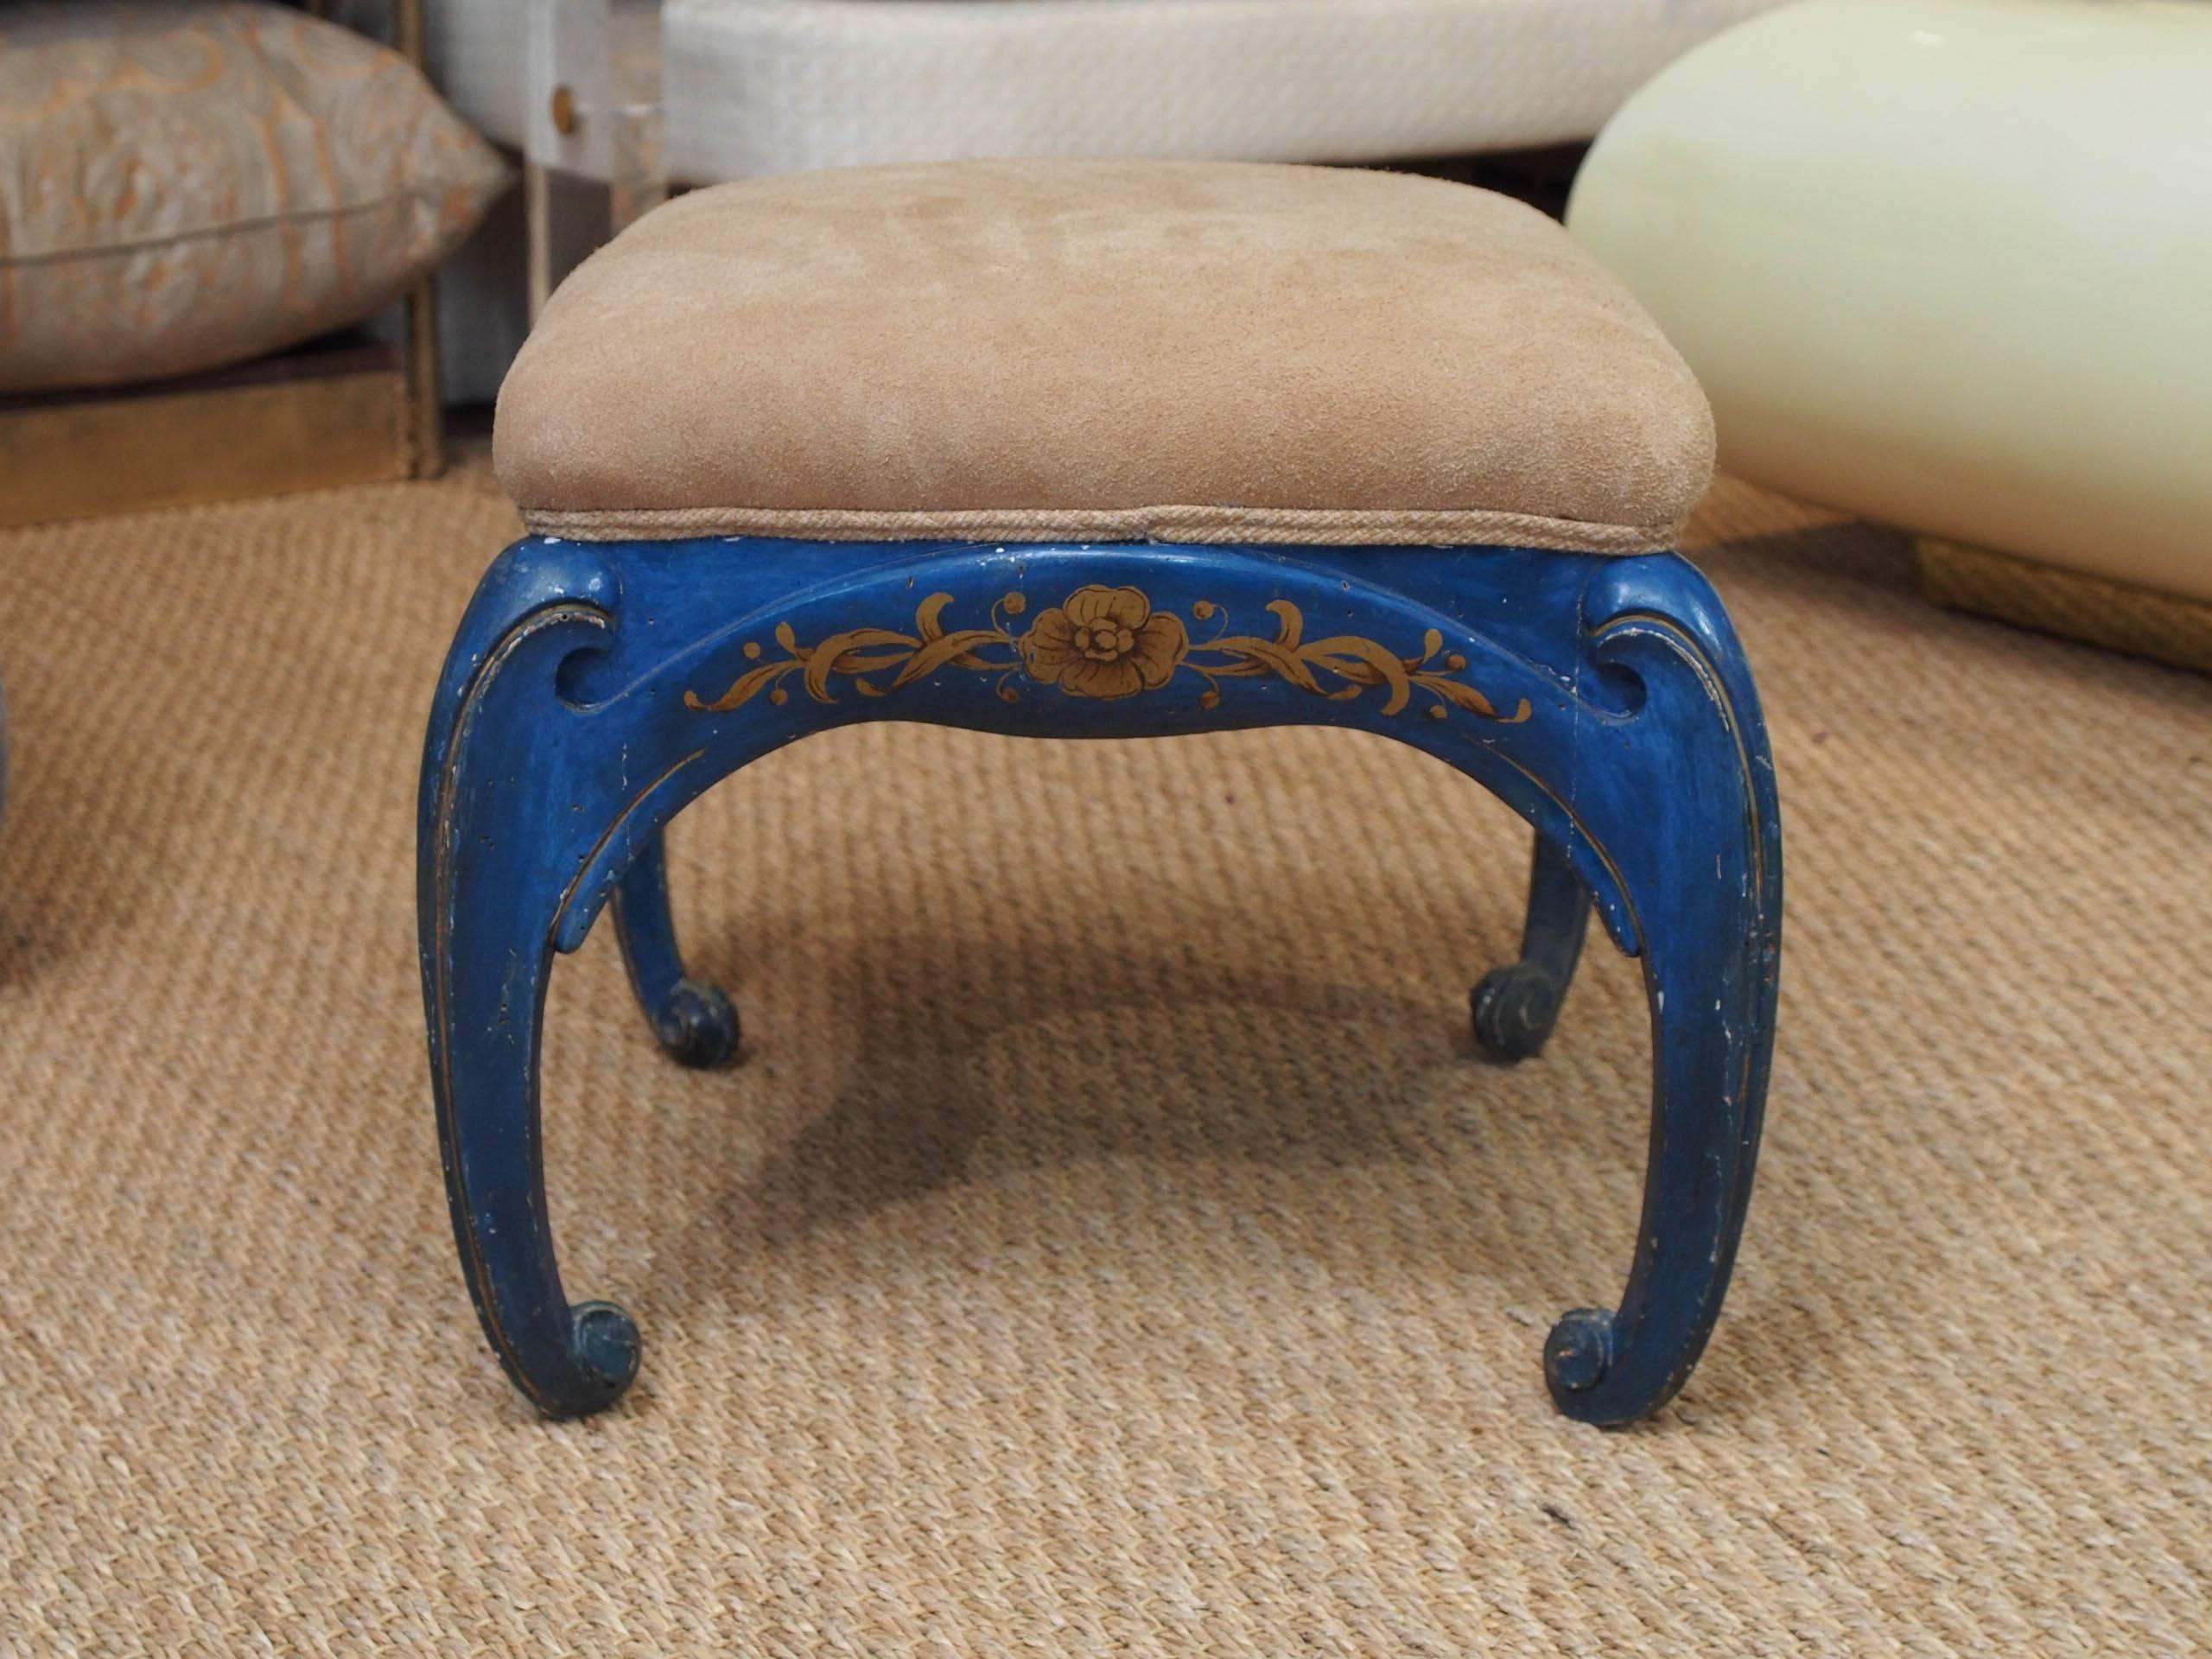 Pair of cobalt blue painted Venetian stools with gilt flower detail and chinoiserie legs.